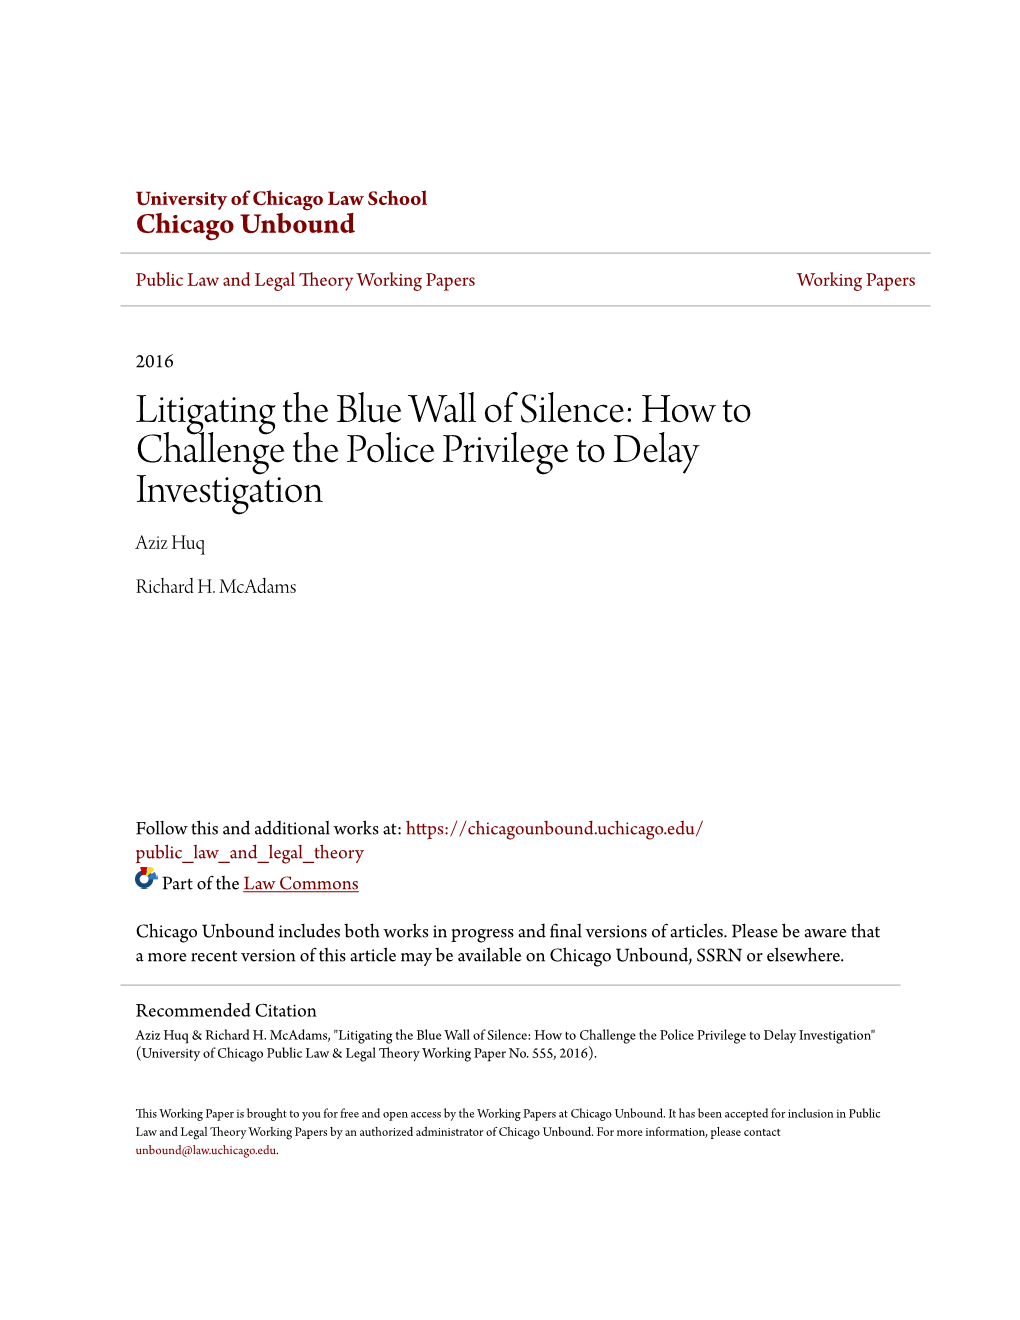 Litigating the Blue Wall of Silence: How to Challenge the Police Privilege to Delay Investigation Aziz Huq